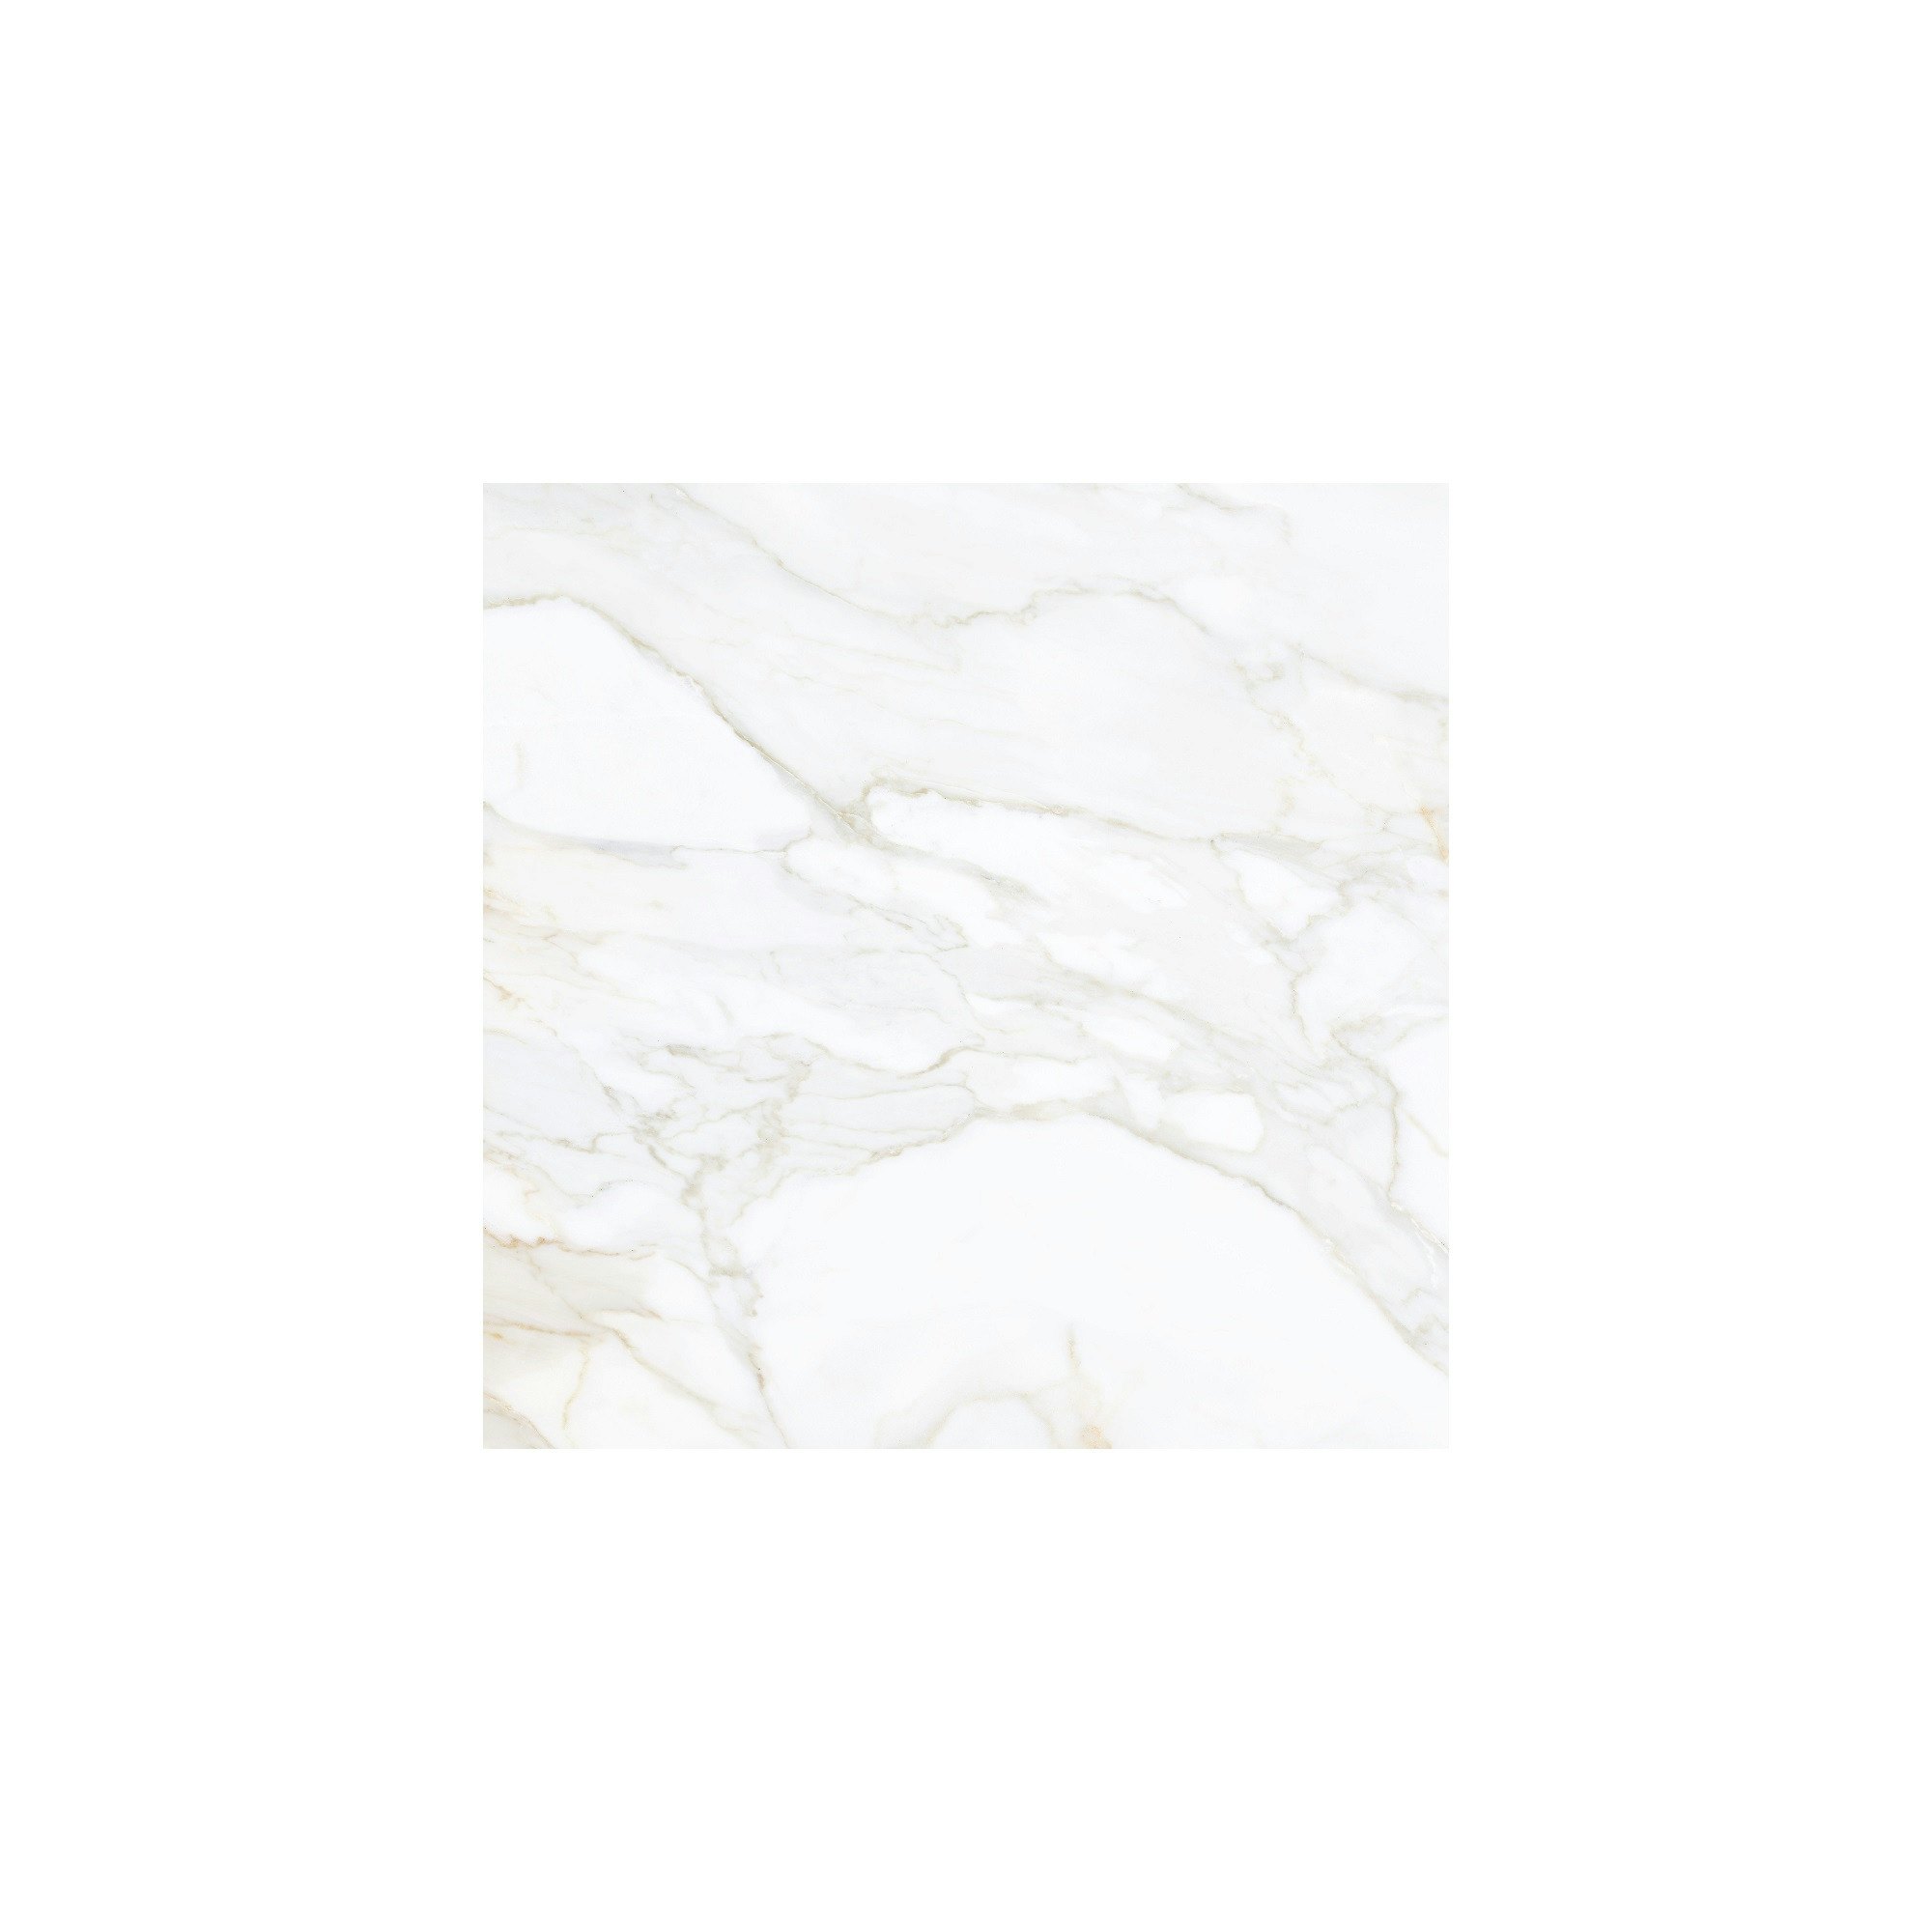 Livorno Grey Gold Marble Effect 600x600mm Tile